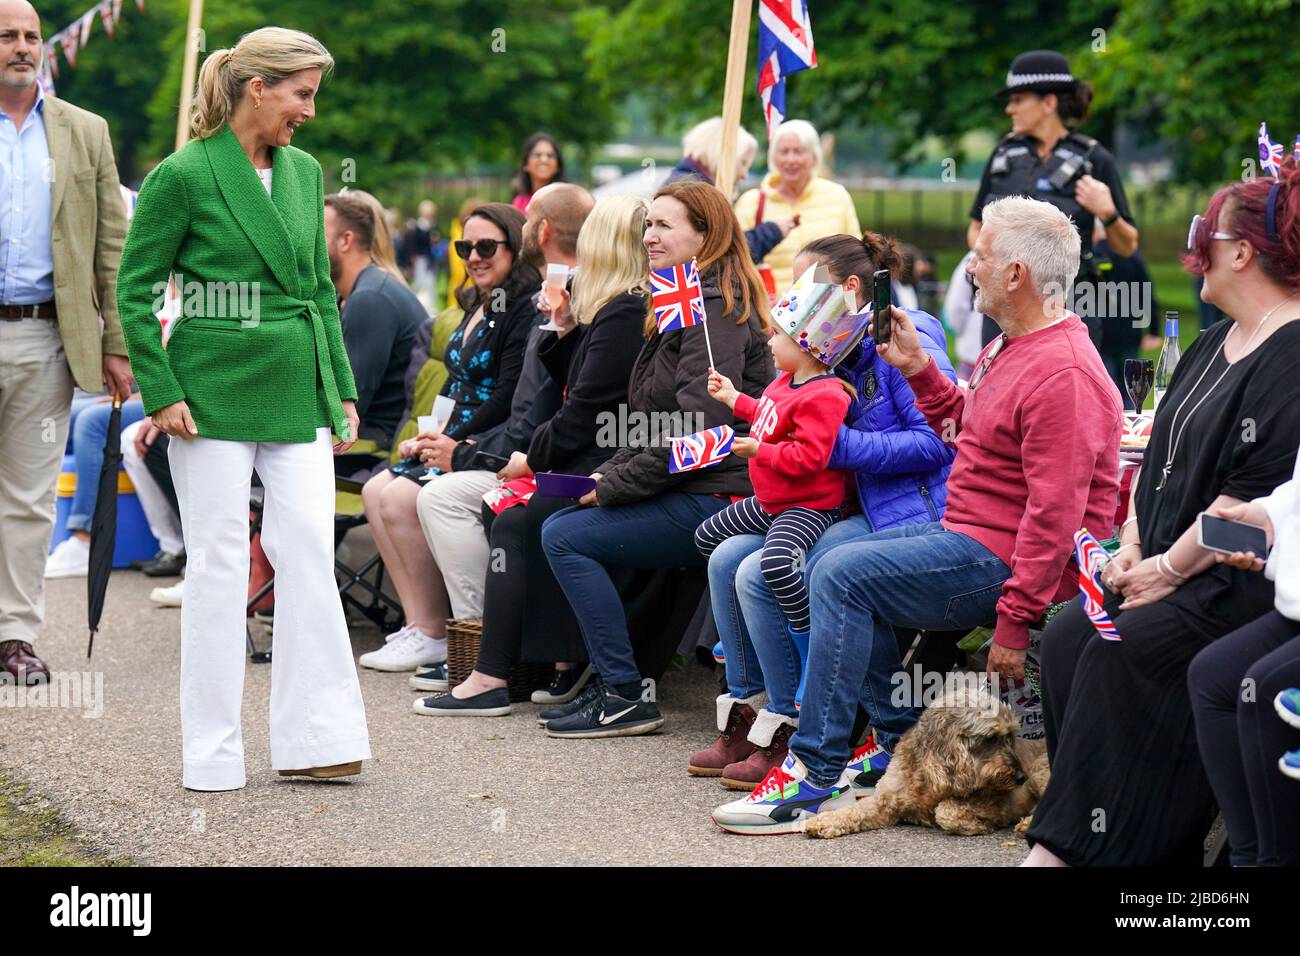 The Countess of Wessex during the Big Jubilee Lunch with members of the local community seated at 'The Long Table' on The Long Walk, Windsor Castle, on day four of the Platinum Jubilee celebrations. Picture date: Sunday June 5, 2022. Stock Photo